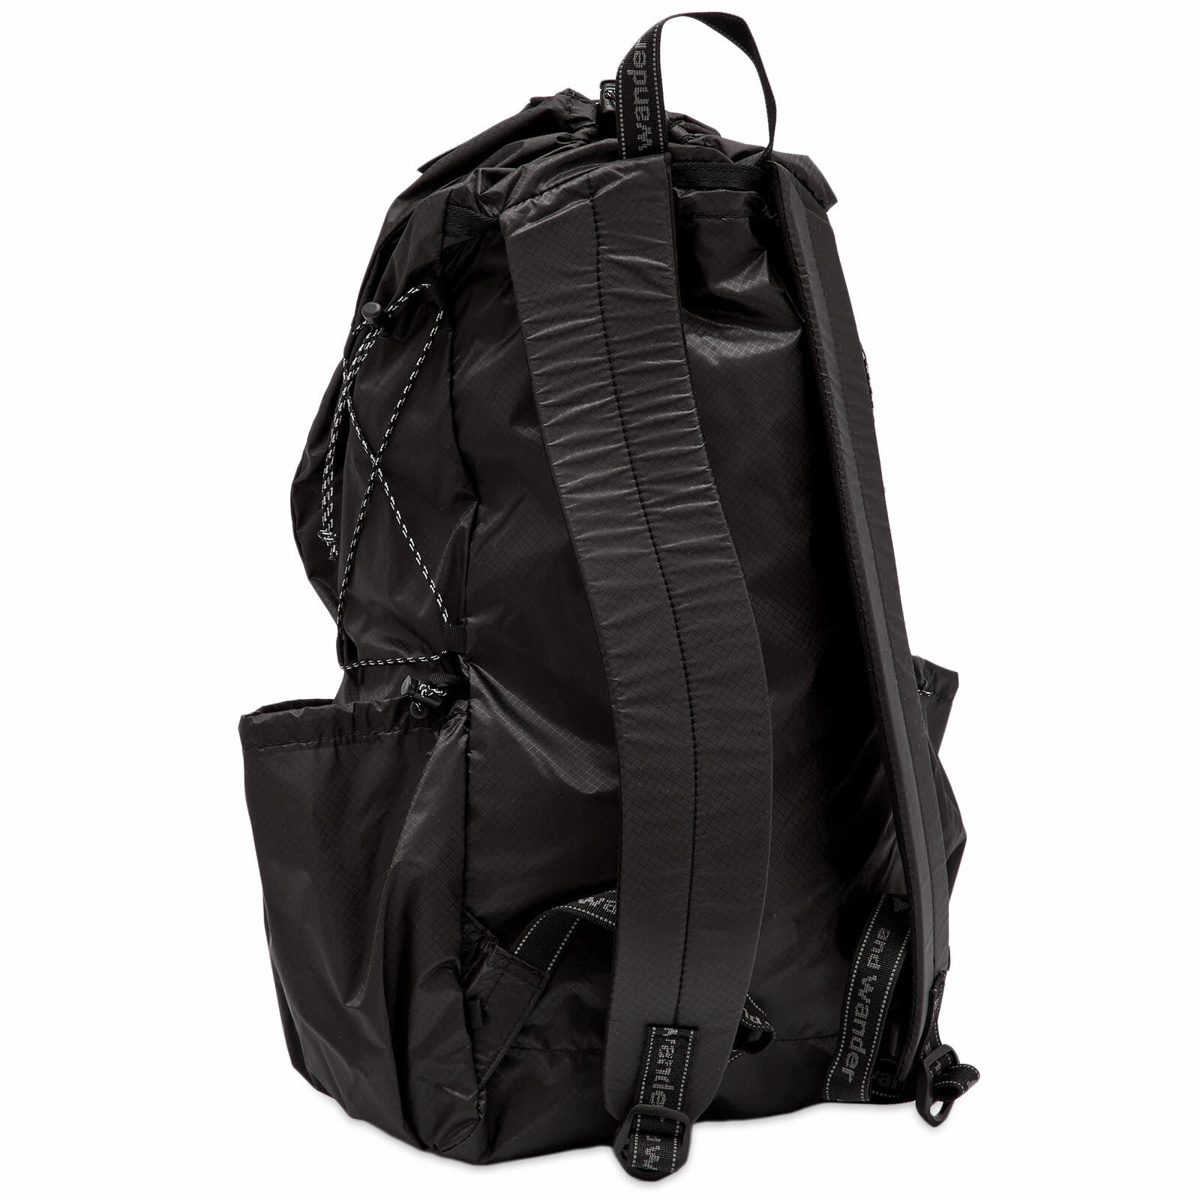 And Wander Men's Sil Day Pack in Charcoal and Wander